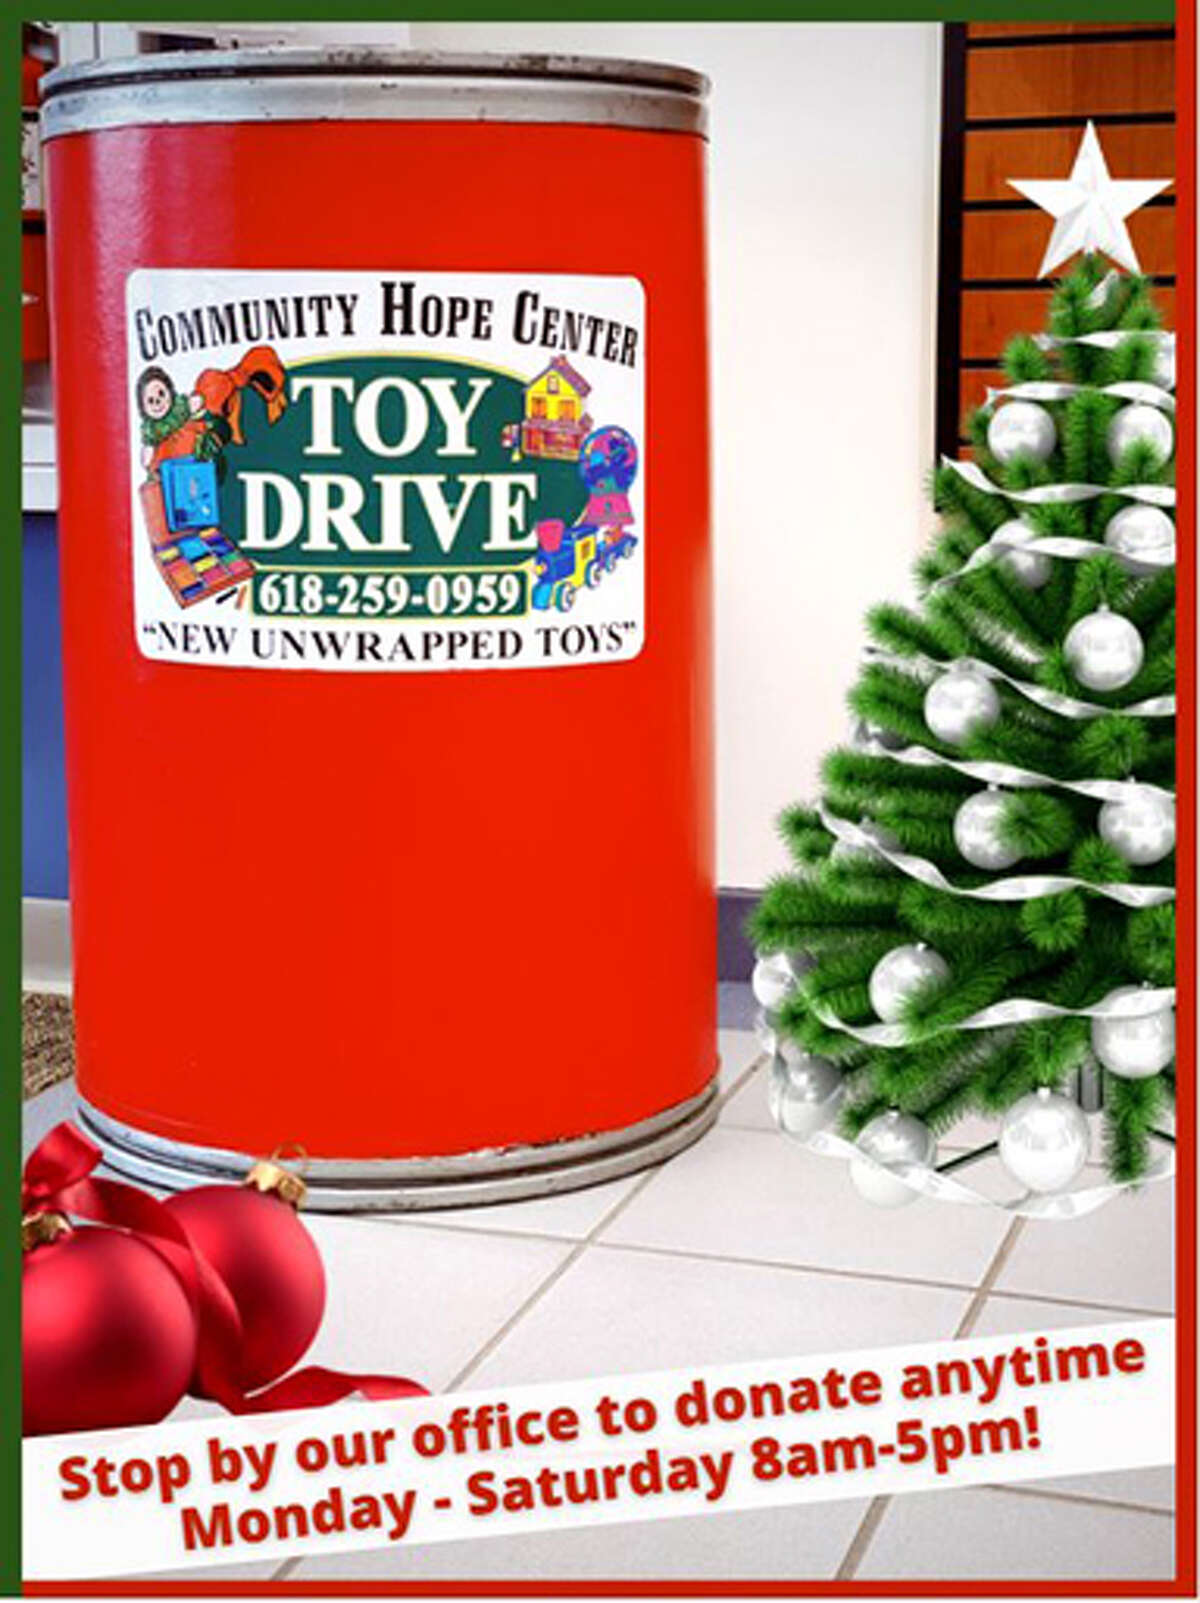 Community Hope Center Toy Drive.